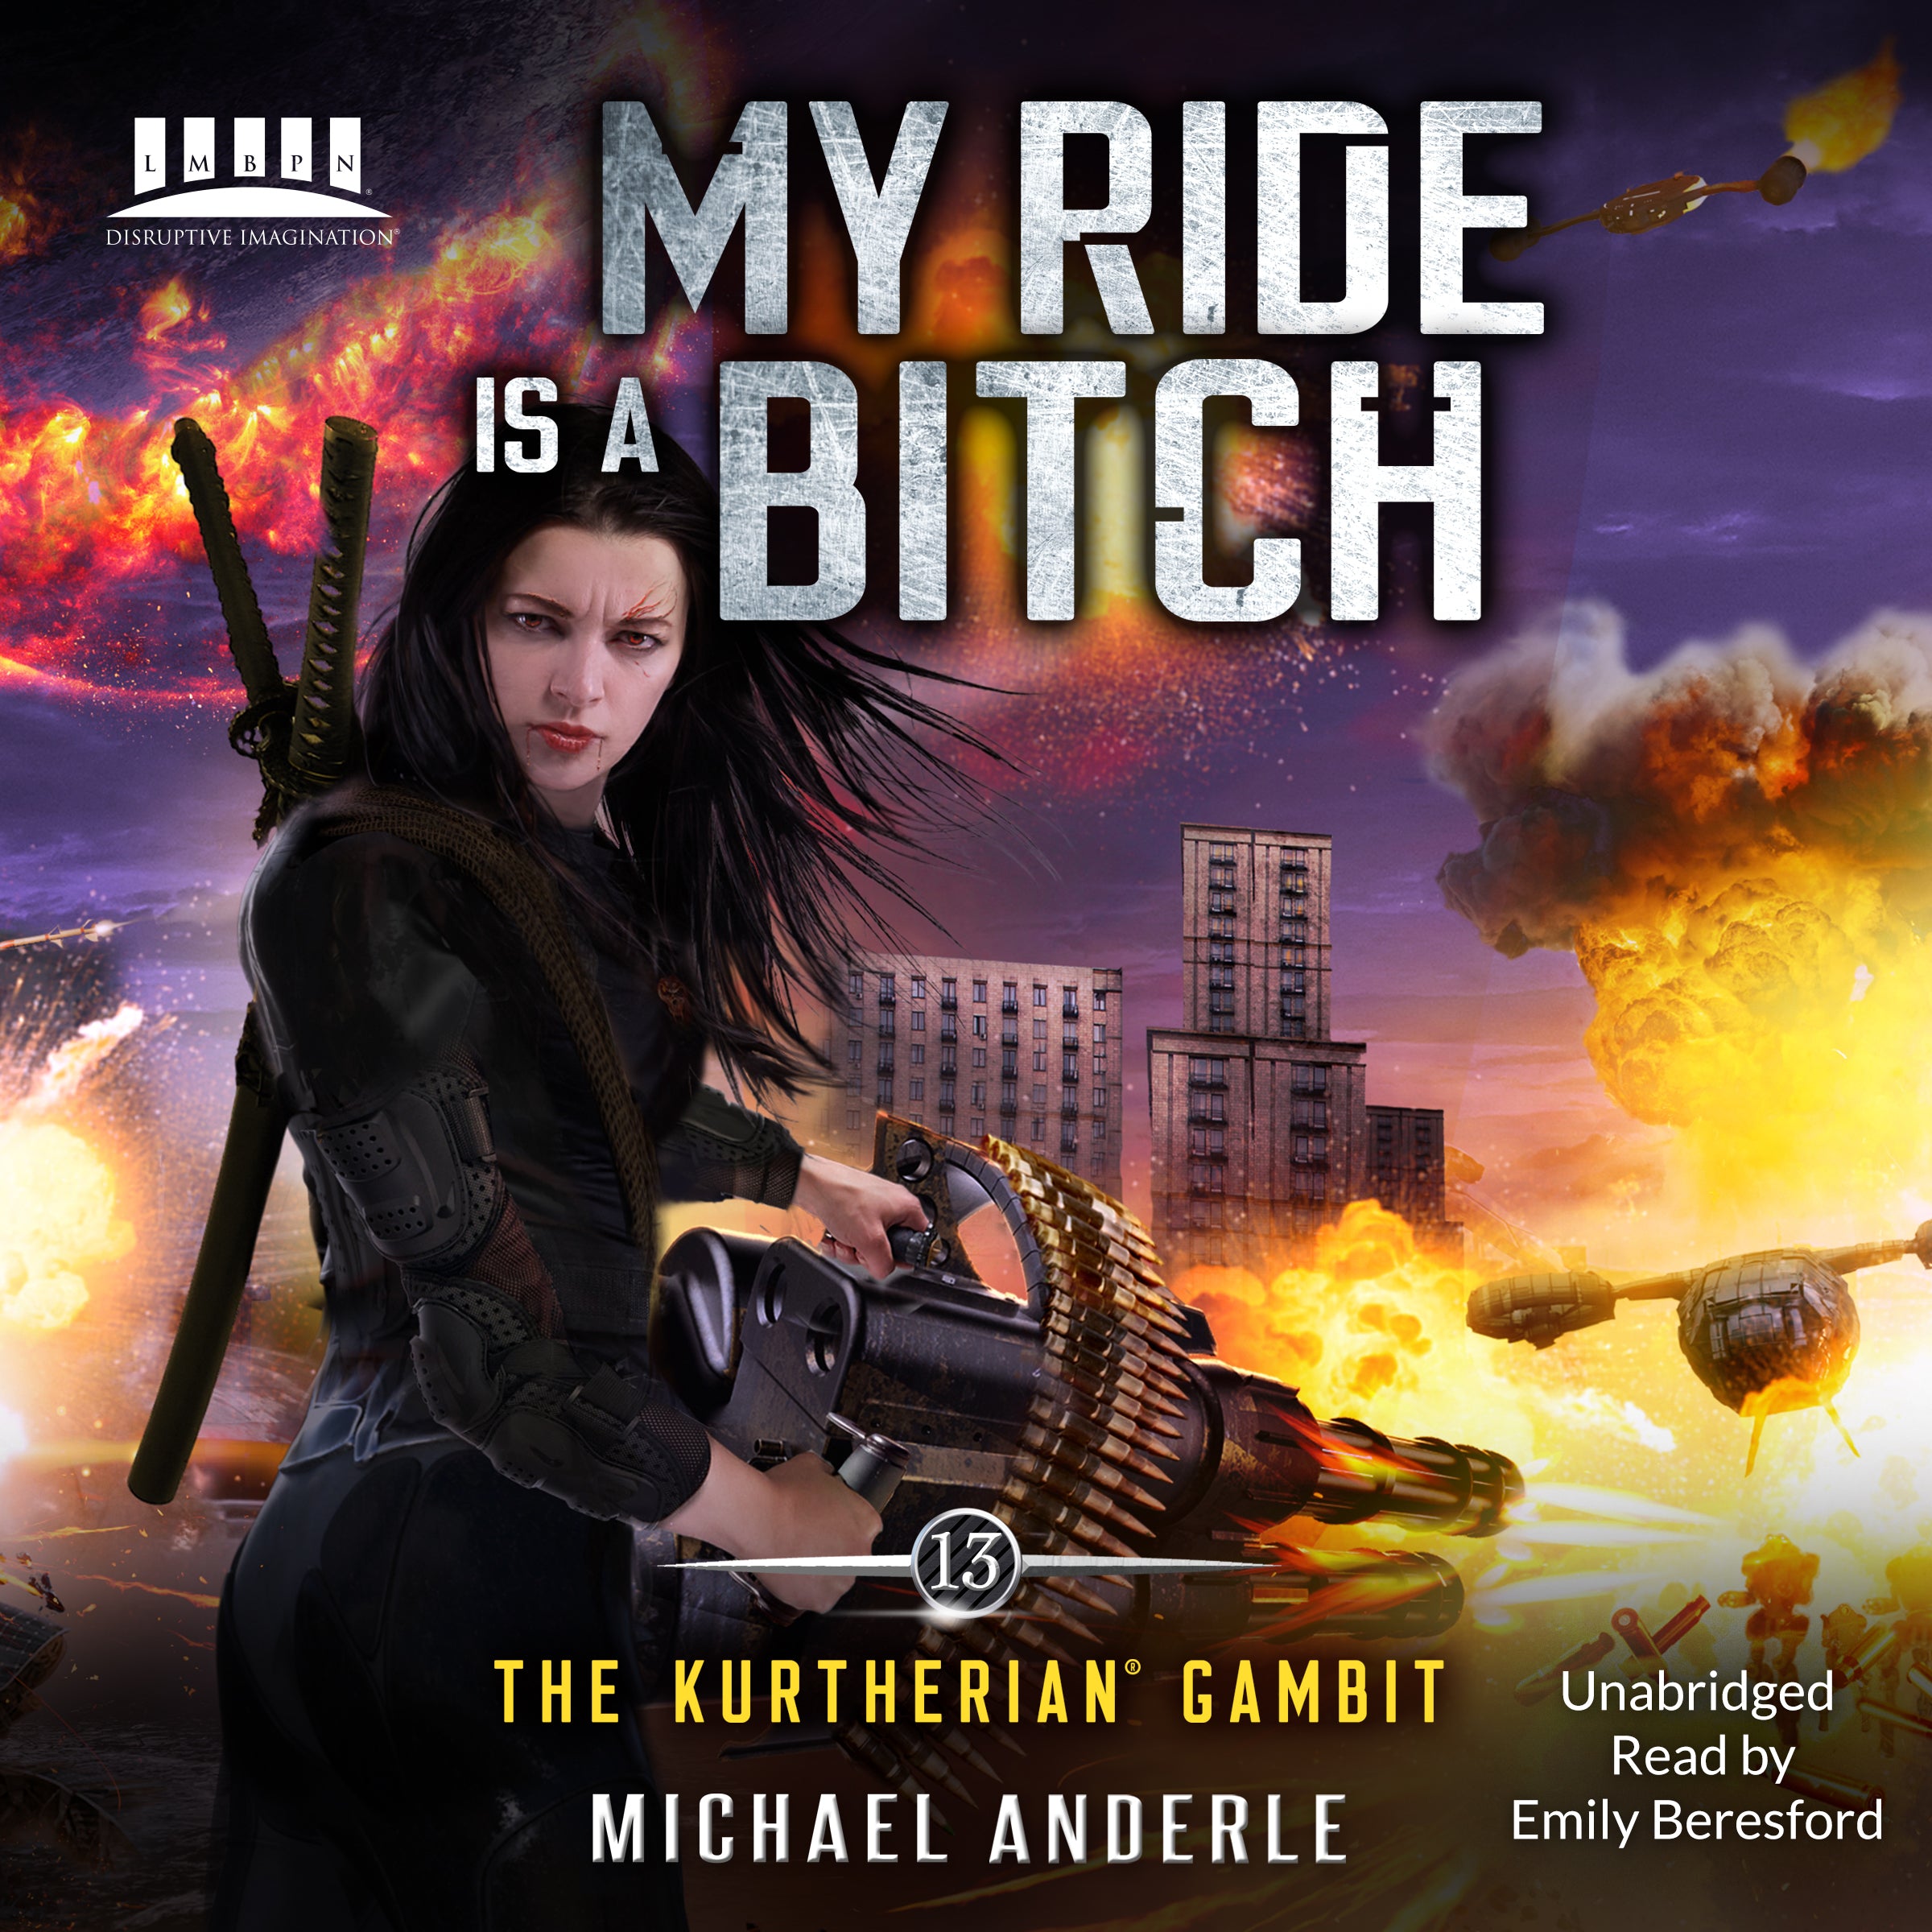 Book 13: My Ride is a Bitch Audiobook